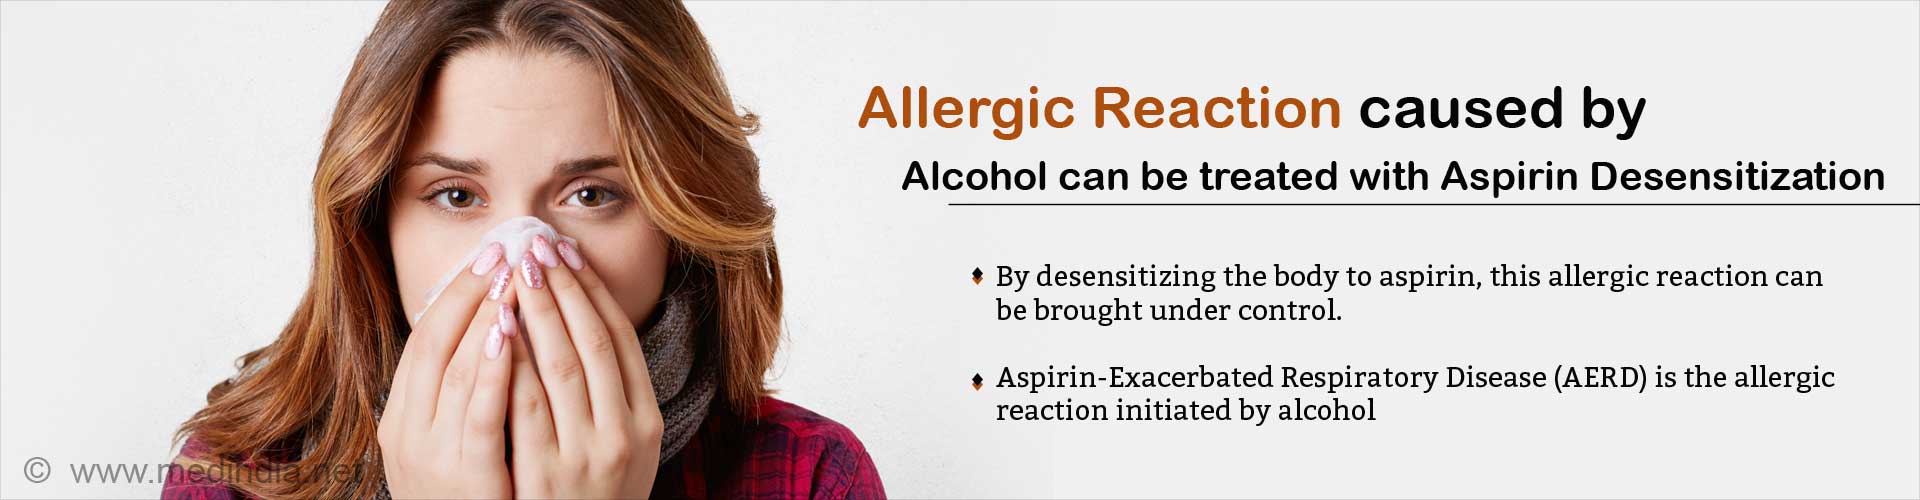 Allergic reaction caused by alcohol can be treated with aspirin desensitization. By desensitizing the body to aspirin, this allergic reaction can be brought under control. Aspirin-Exacerbated Respiratory Disease (AERD) is the allergic reaction initiated by alcohol.